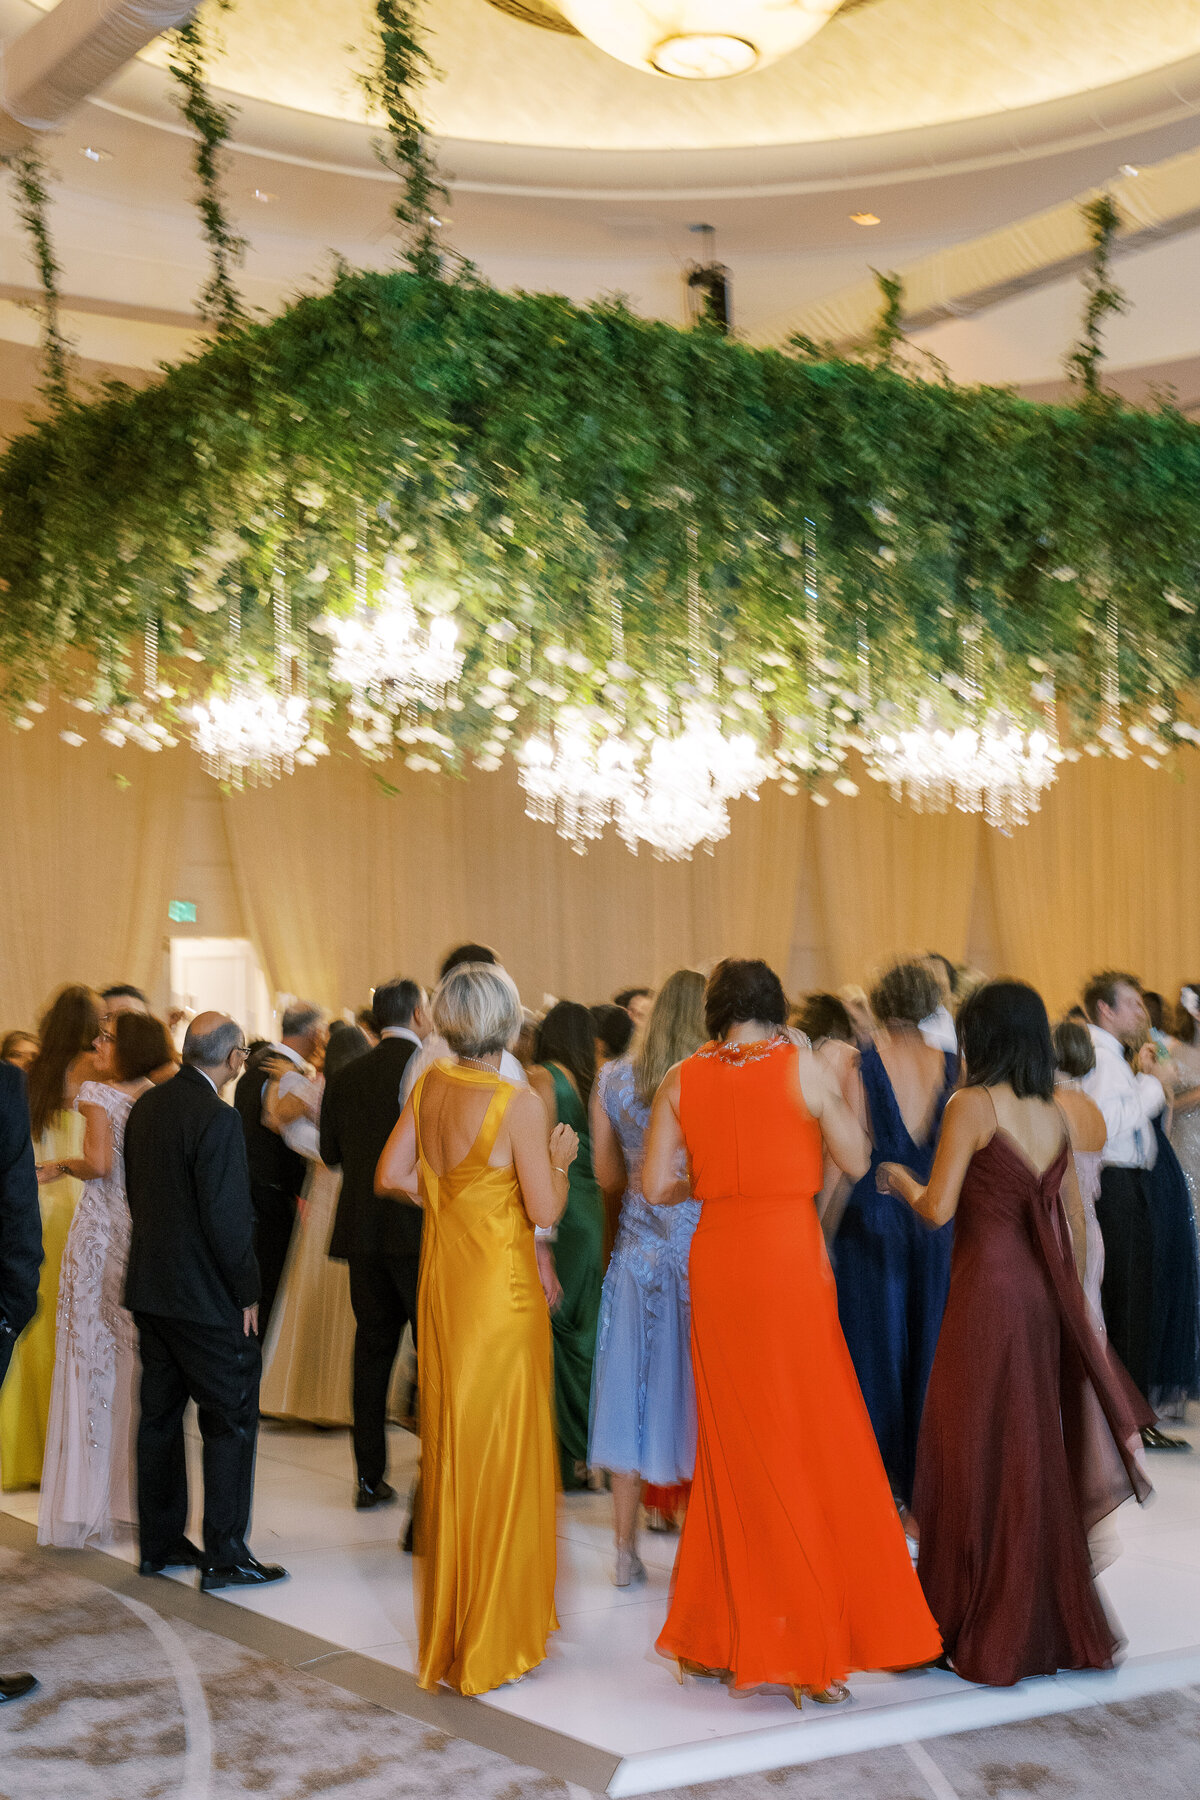 People dancing at a wedding reception under a giant floral piece